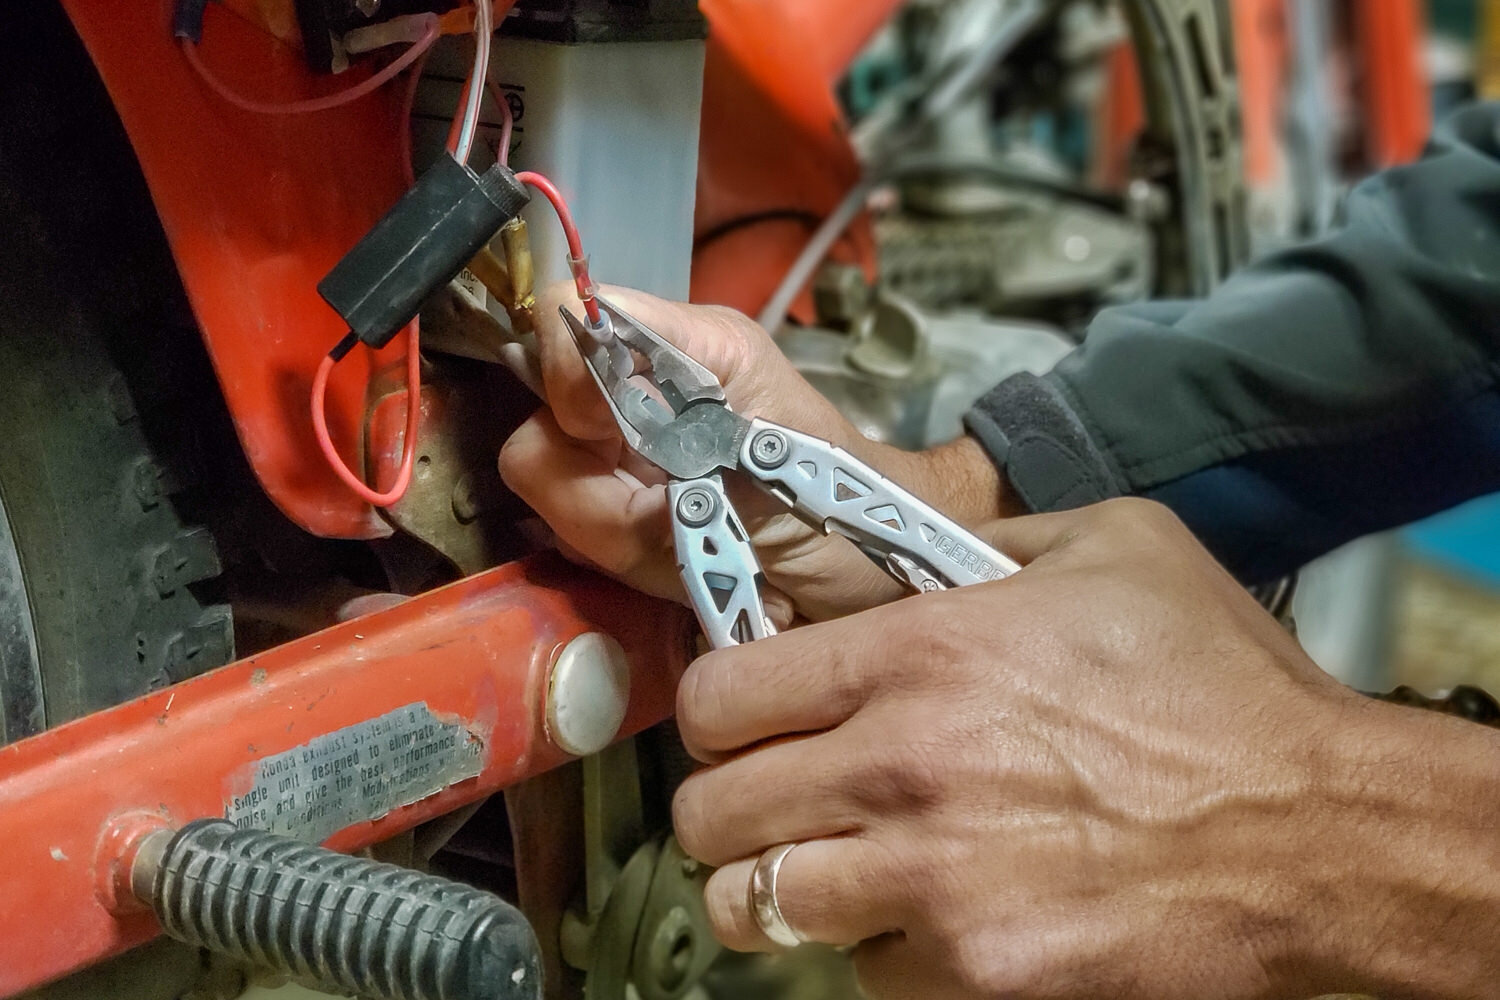 The Gerber Suspension NXT Multitool is one of the most affordable full-size multitools on the market.